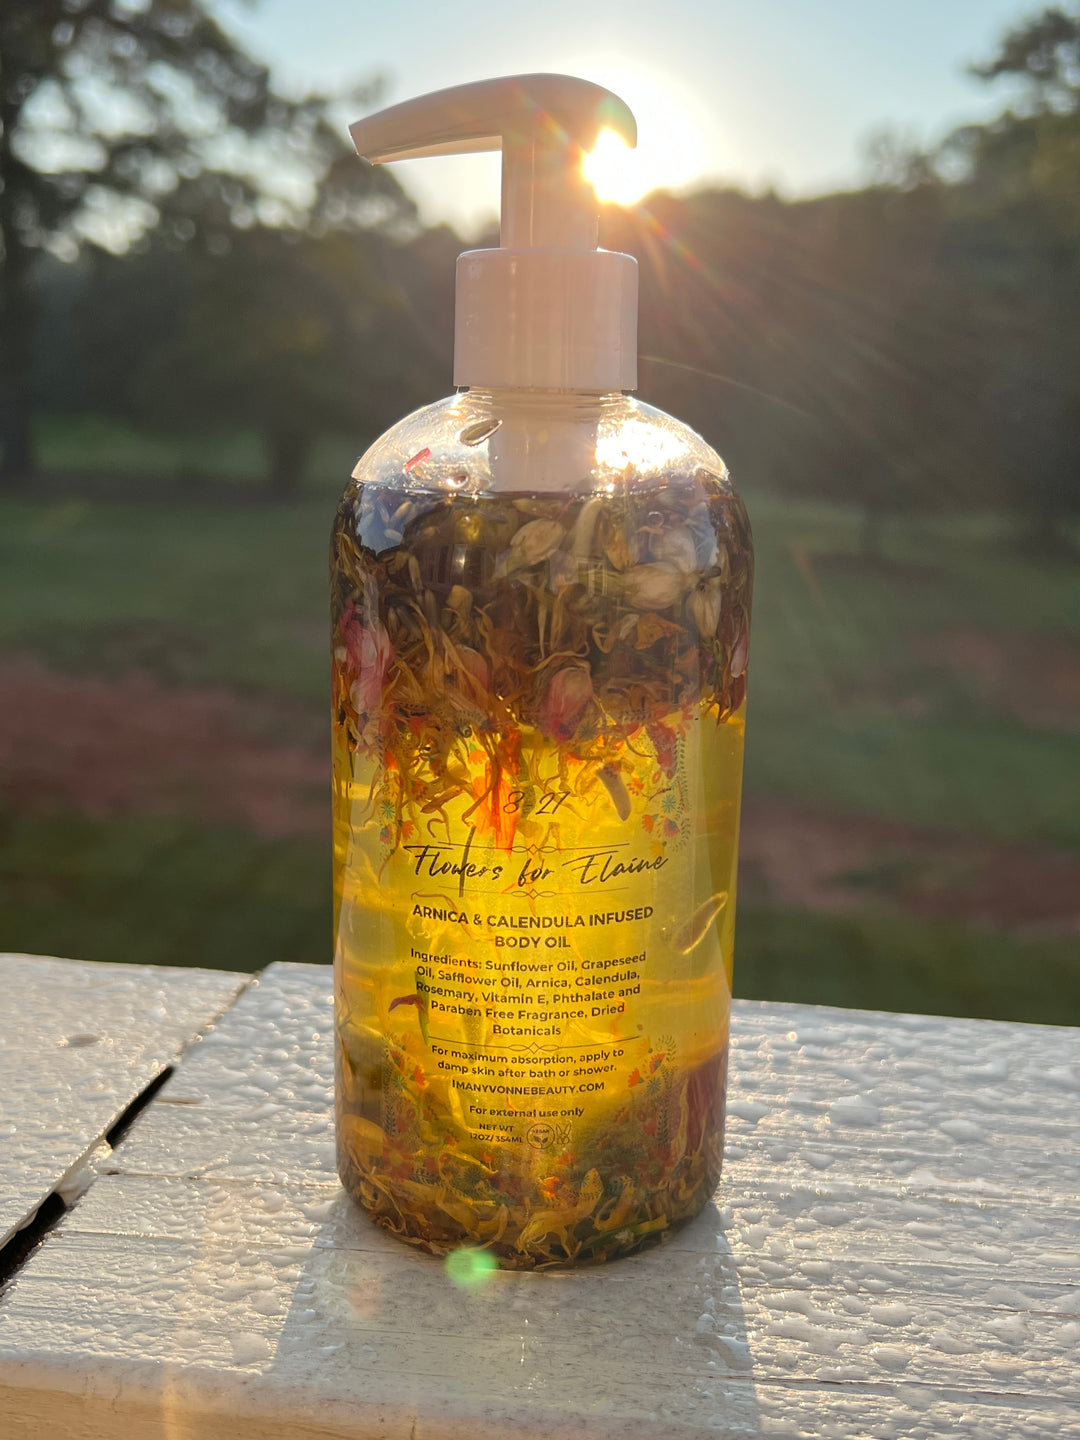 Luxurious Infused Body Oil- 💐 Flowers for Elaine Arnica